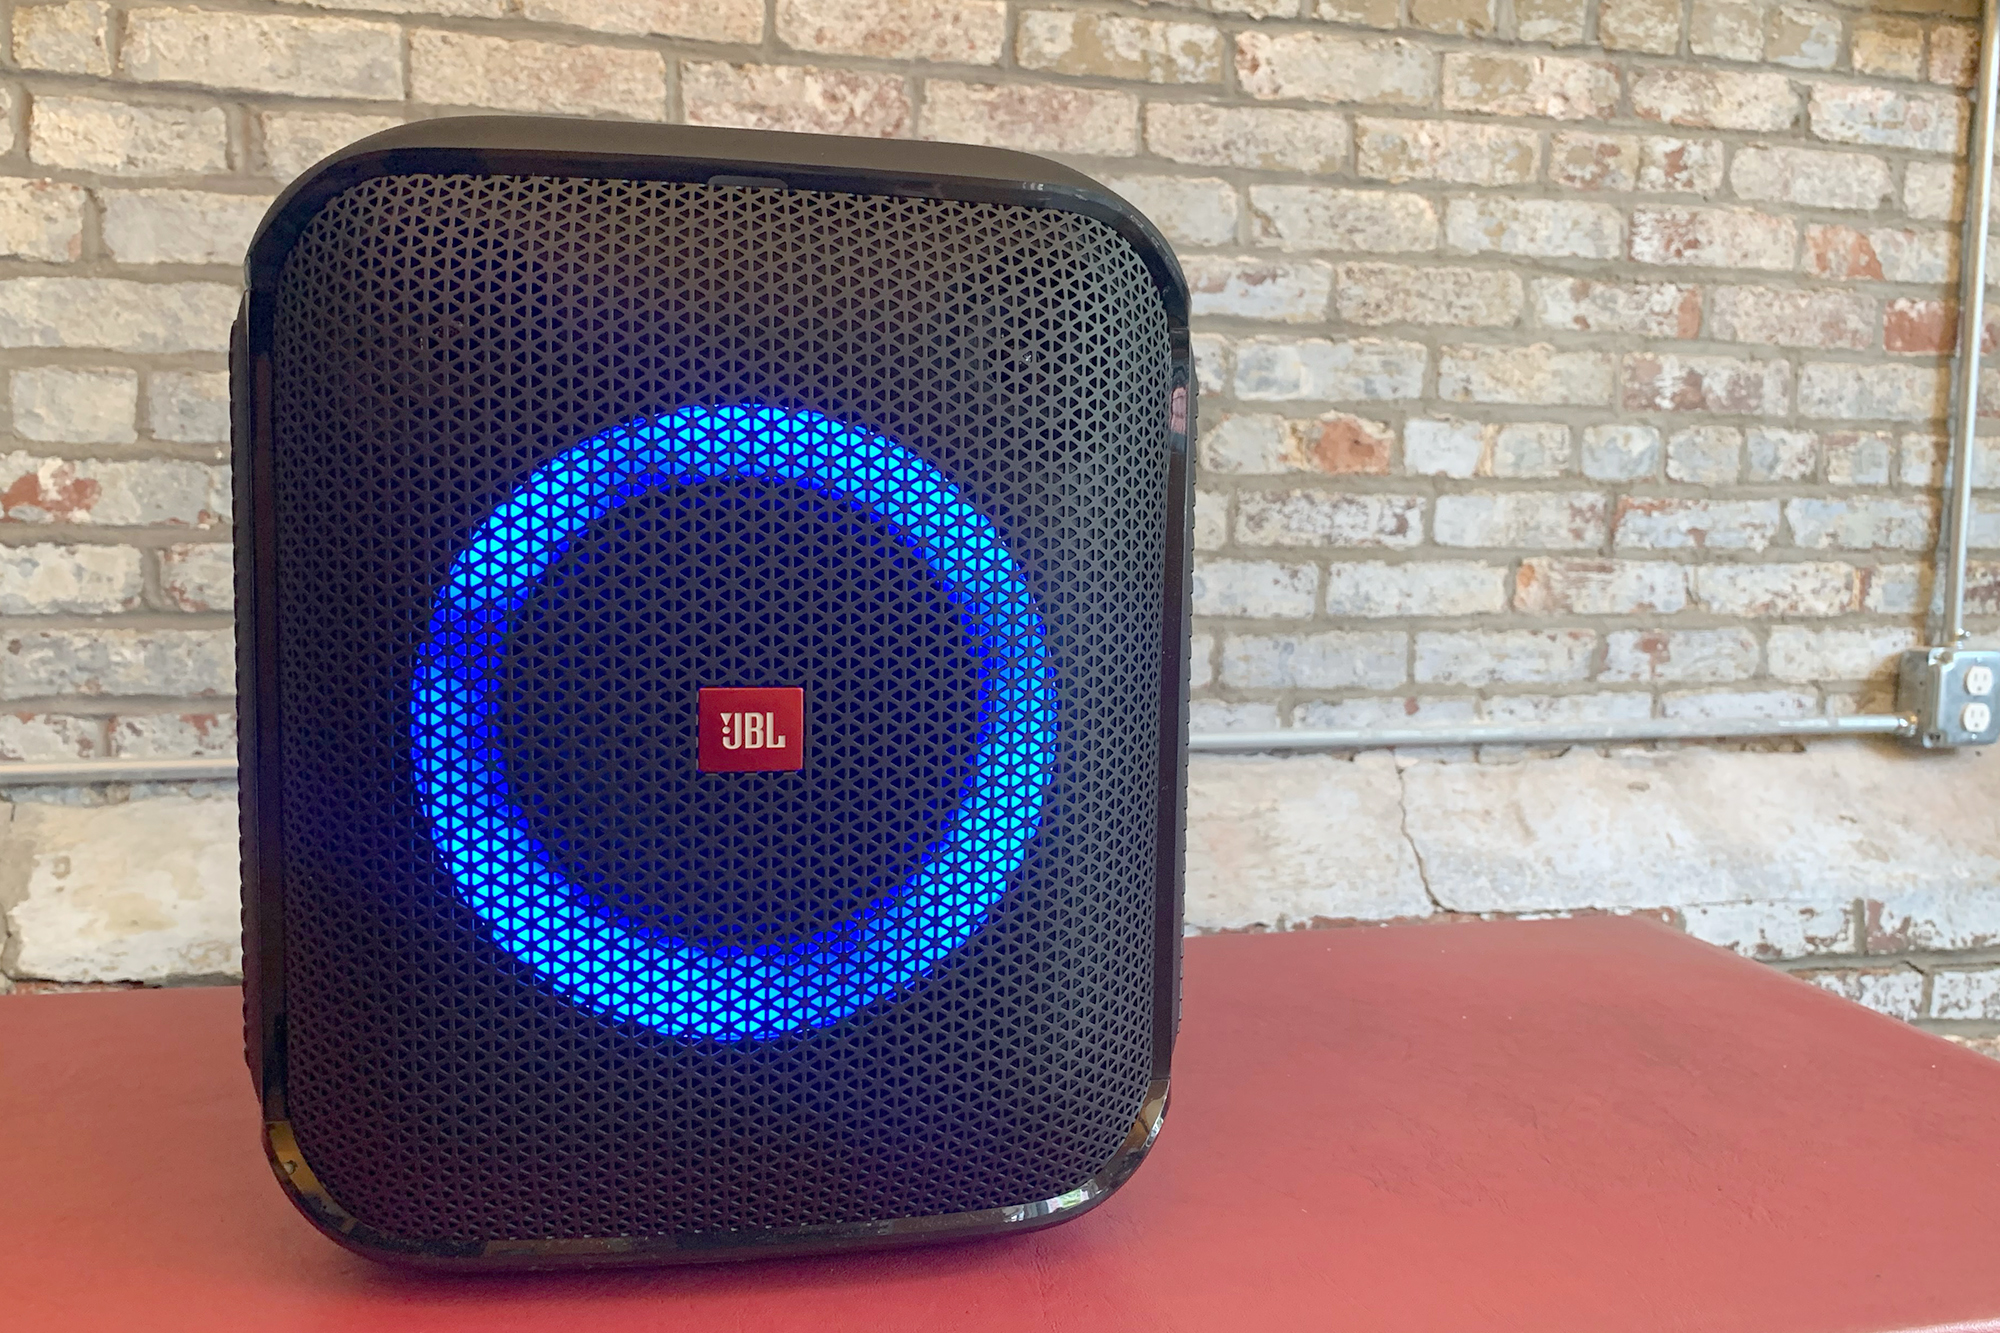 JBL Charge 4 Blue Bluetooth Speaker Empty Box ONLY Does Not Include Speaker